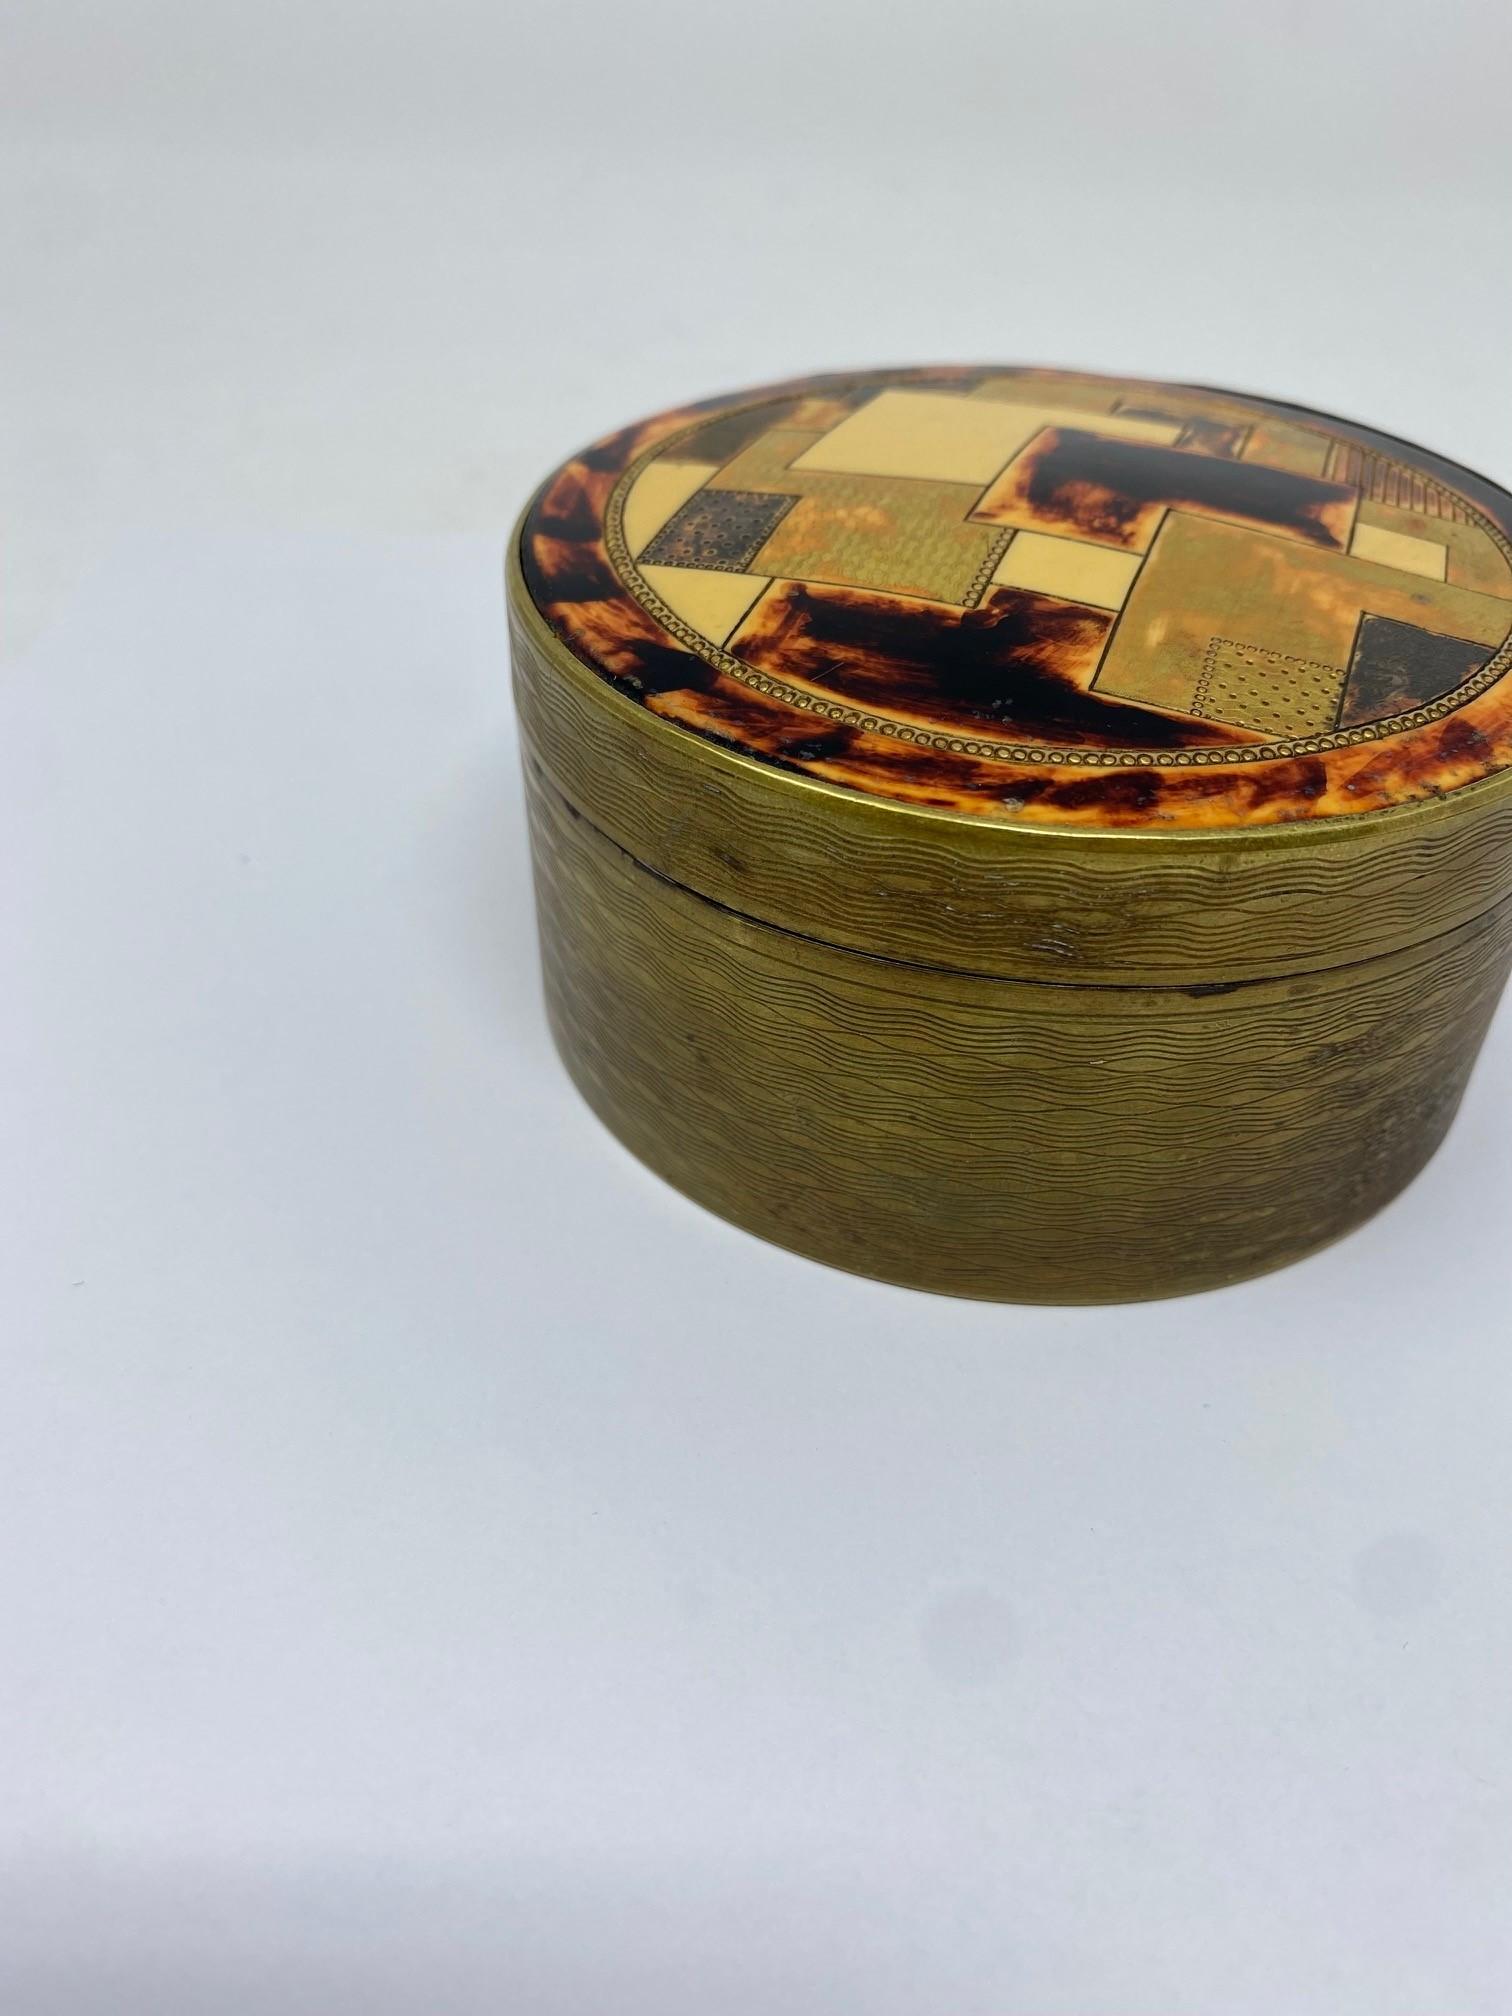 Mid-20th Century Vintage Rare French Art Deco Trinket Box For Sale